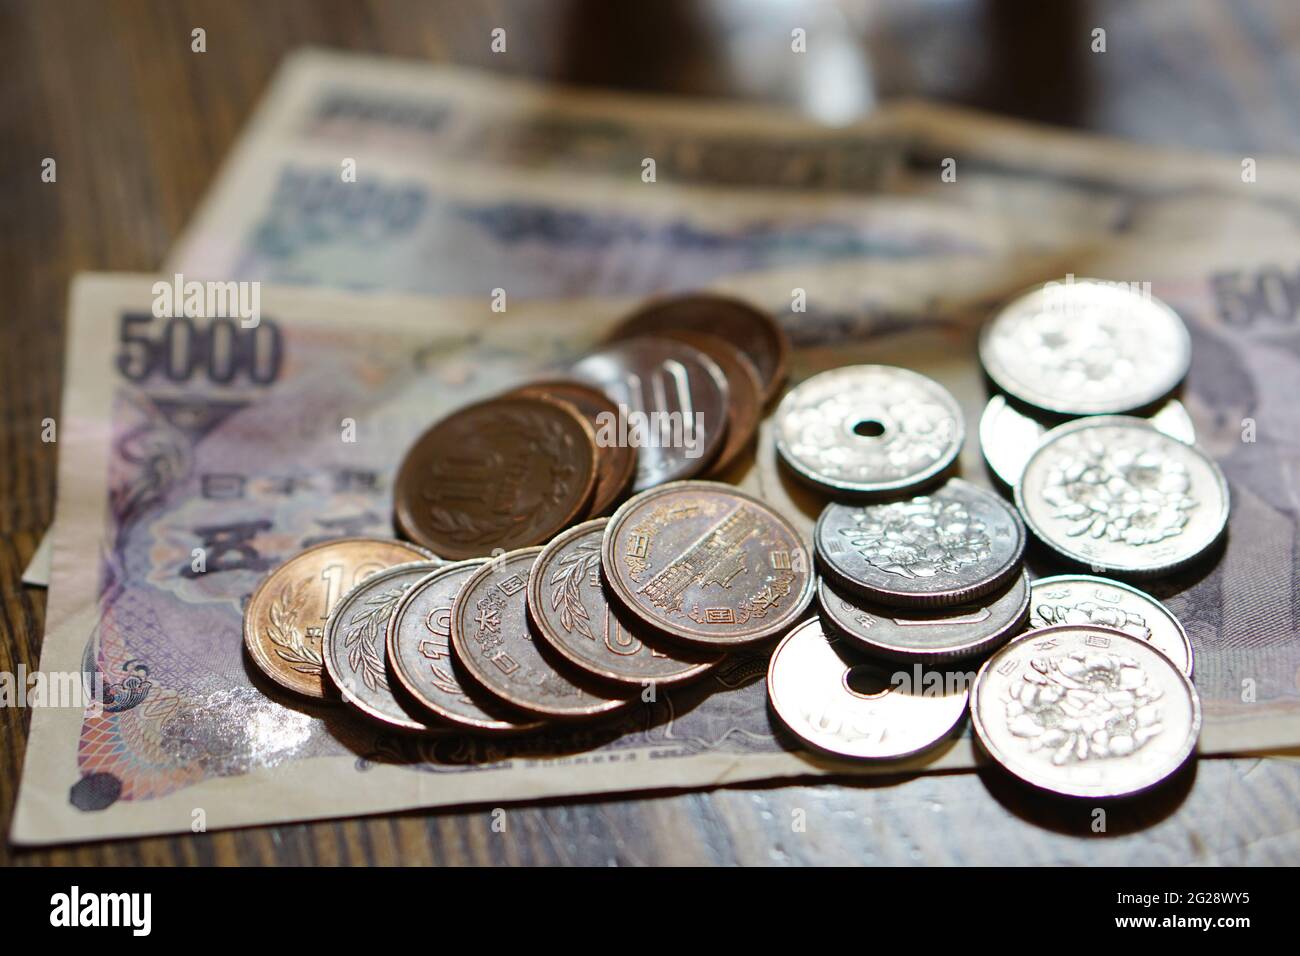 Isolated Japanese currency (yen) with its Asian symbols in the form of coins and bank notes on the white background Stock Photo